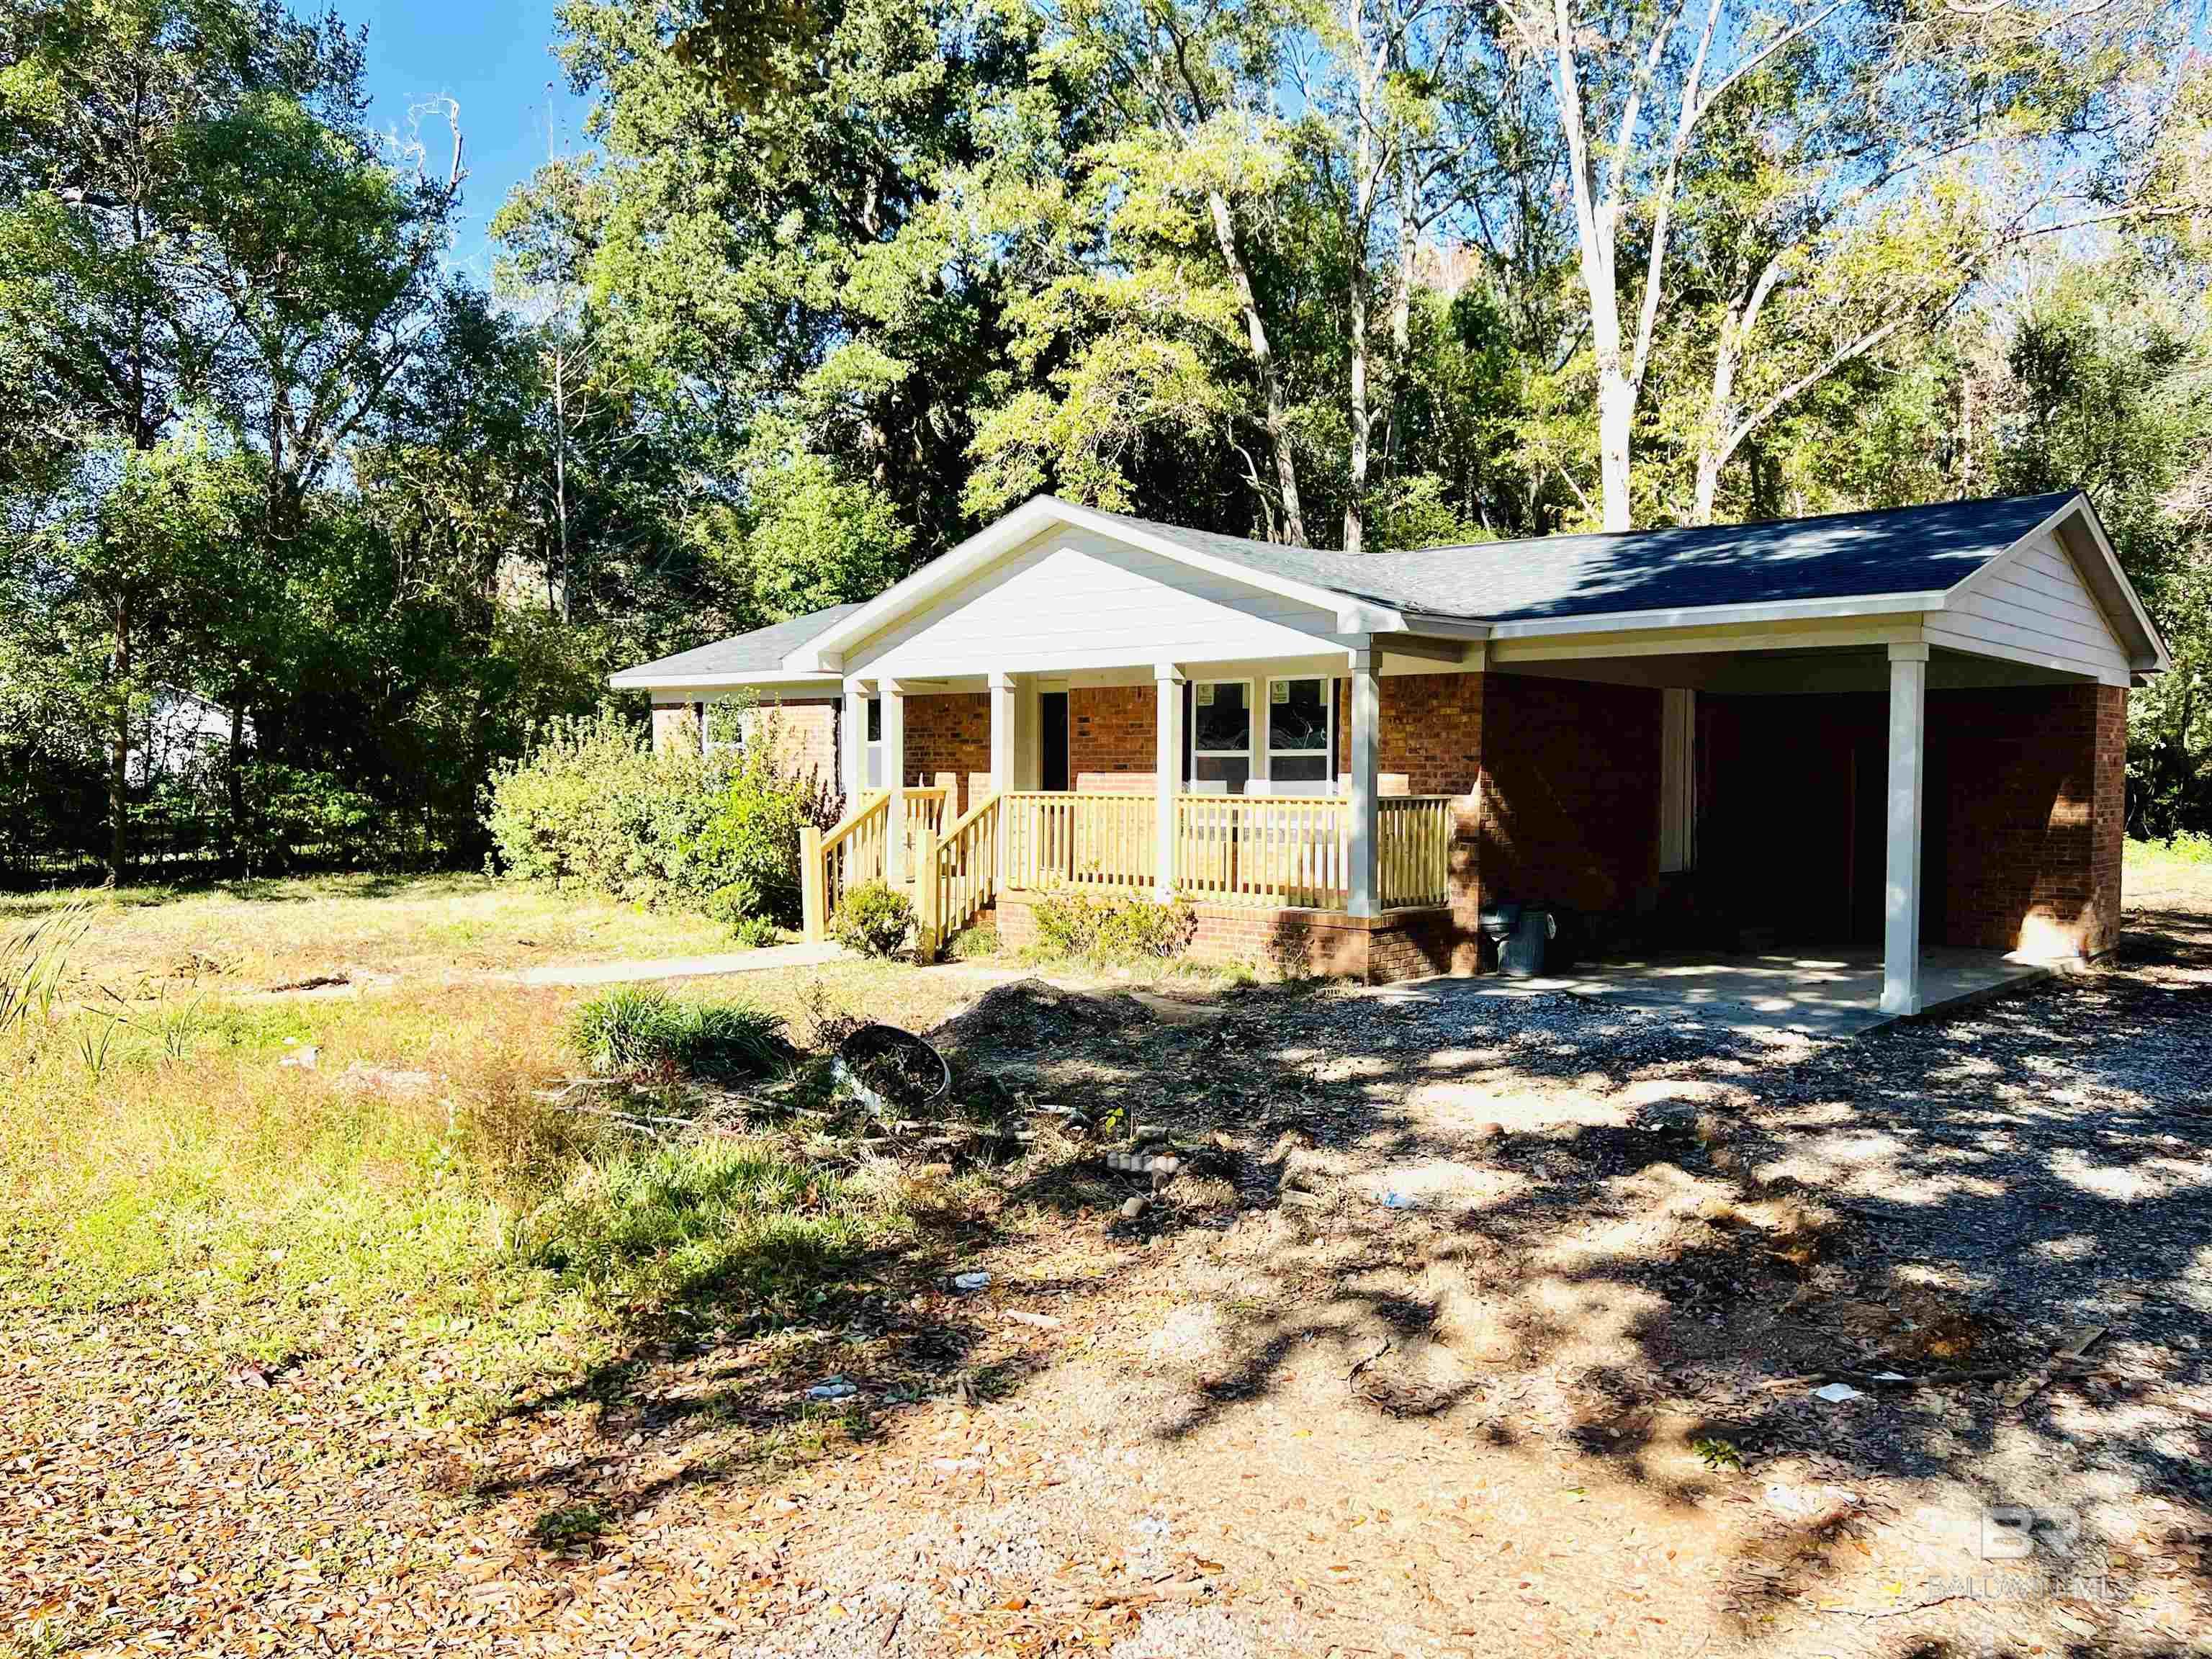 Calling for all investors, this is an EASY one! New roof, New framing, New Windows, New addition with New Siding, New Front and Back Door. MOST of the heavy lifting has already been done. This little cottage has TOO MUCH POTENTIAL with a Clean Slate to do whatever your heart desires. The home is close to downtown Fairhope, Thomas Hospital, and all the shopping.